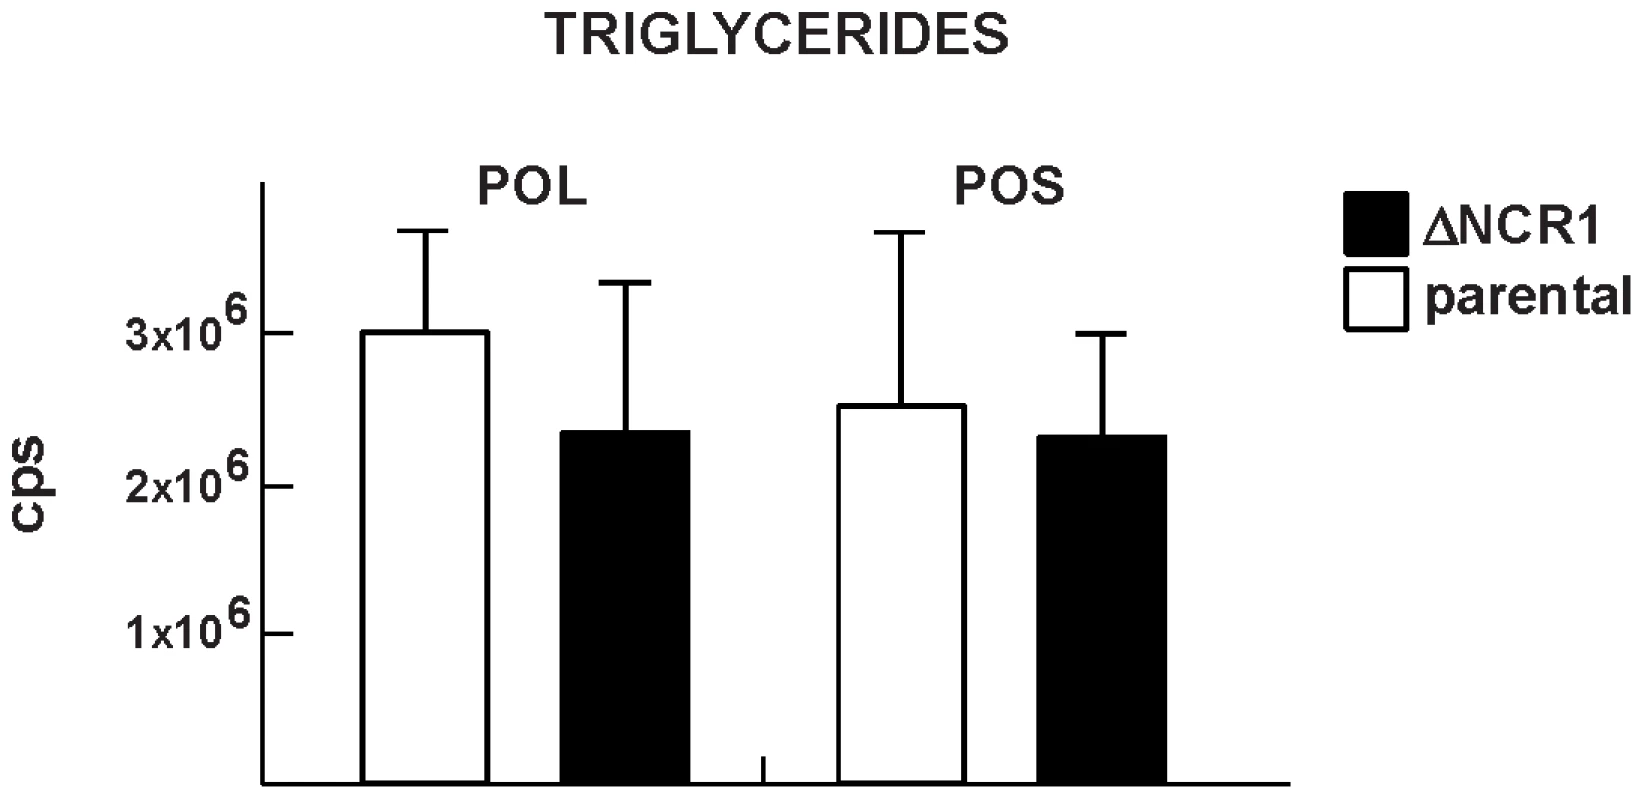 Content of triglycerides in TgNCR1-deficient parasites.